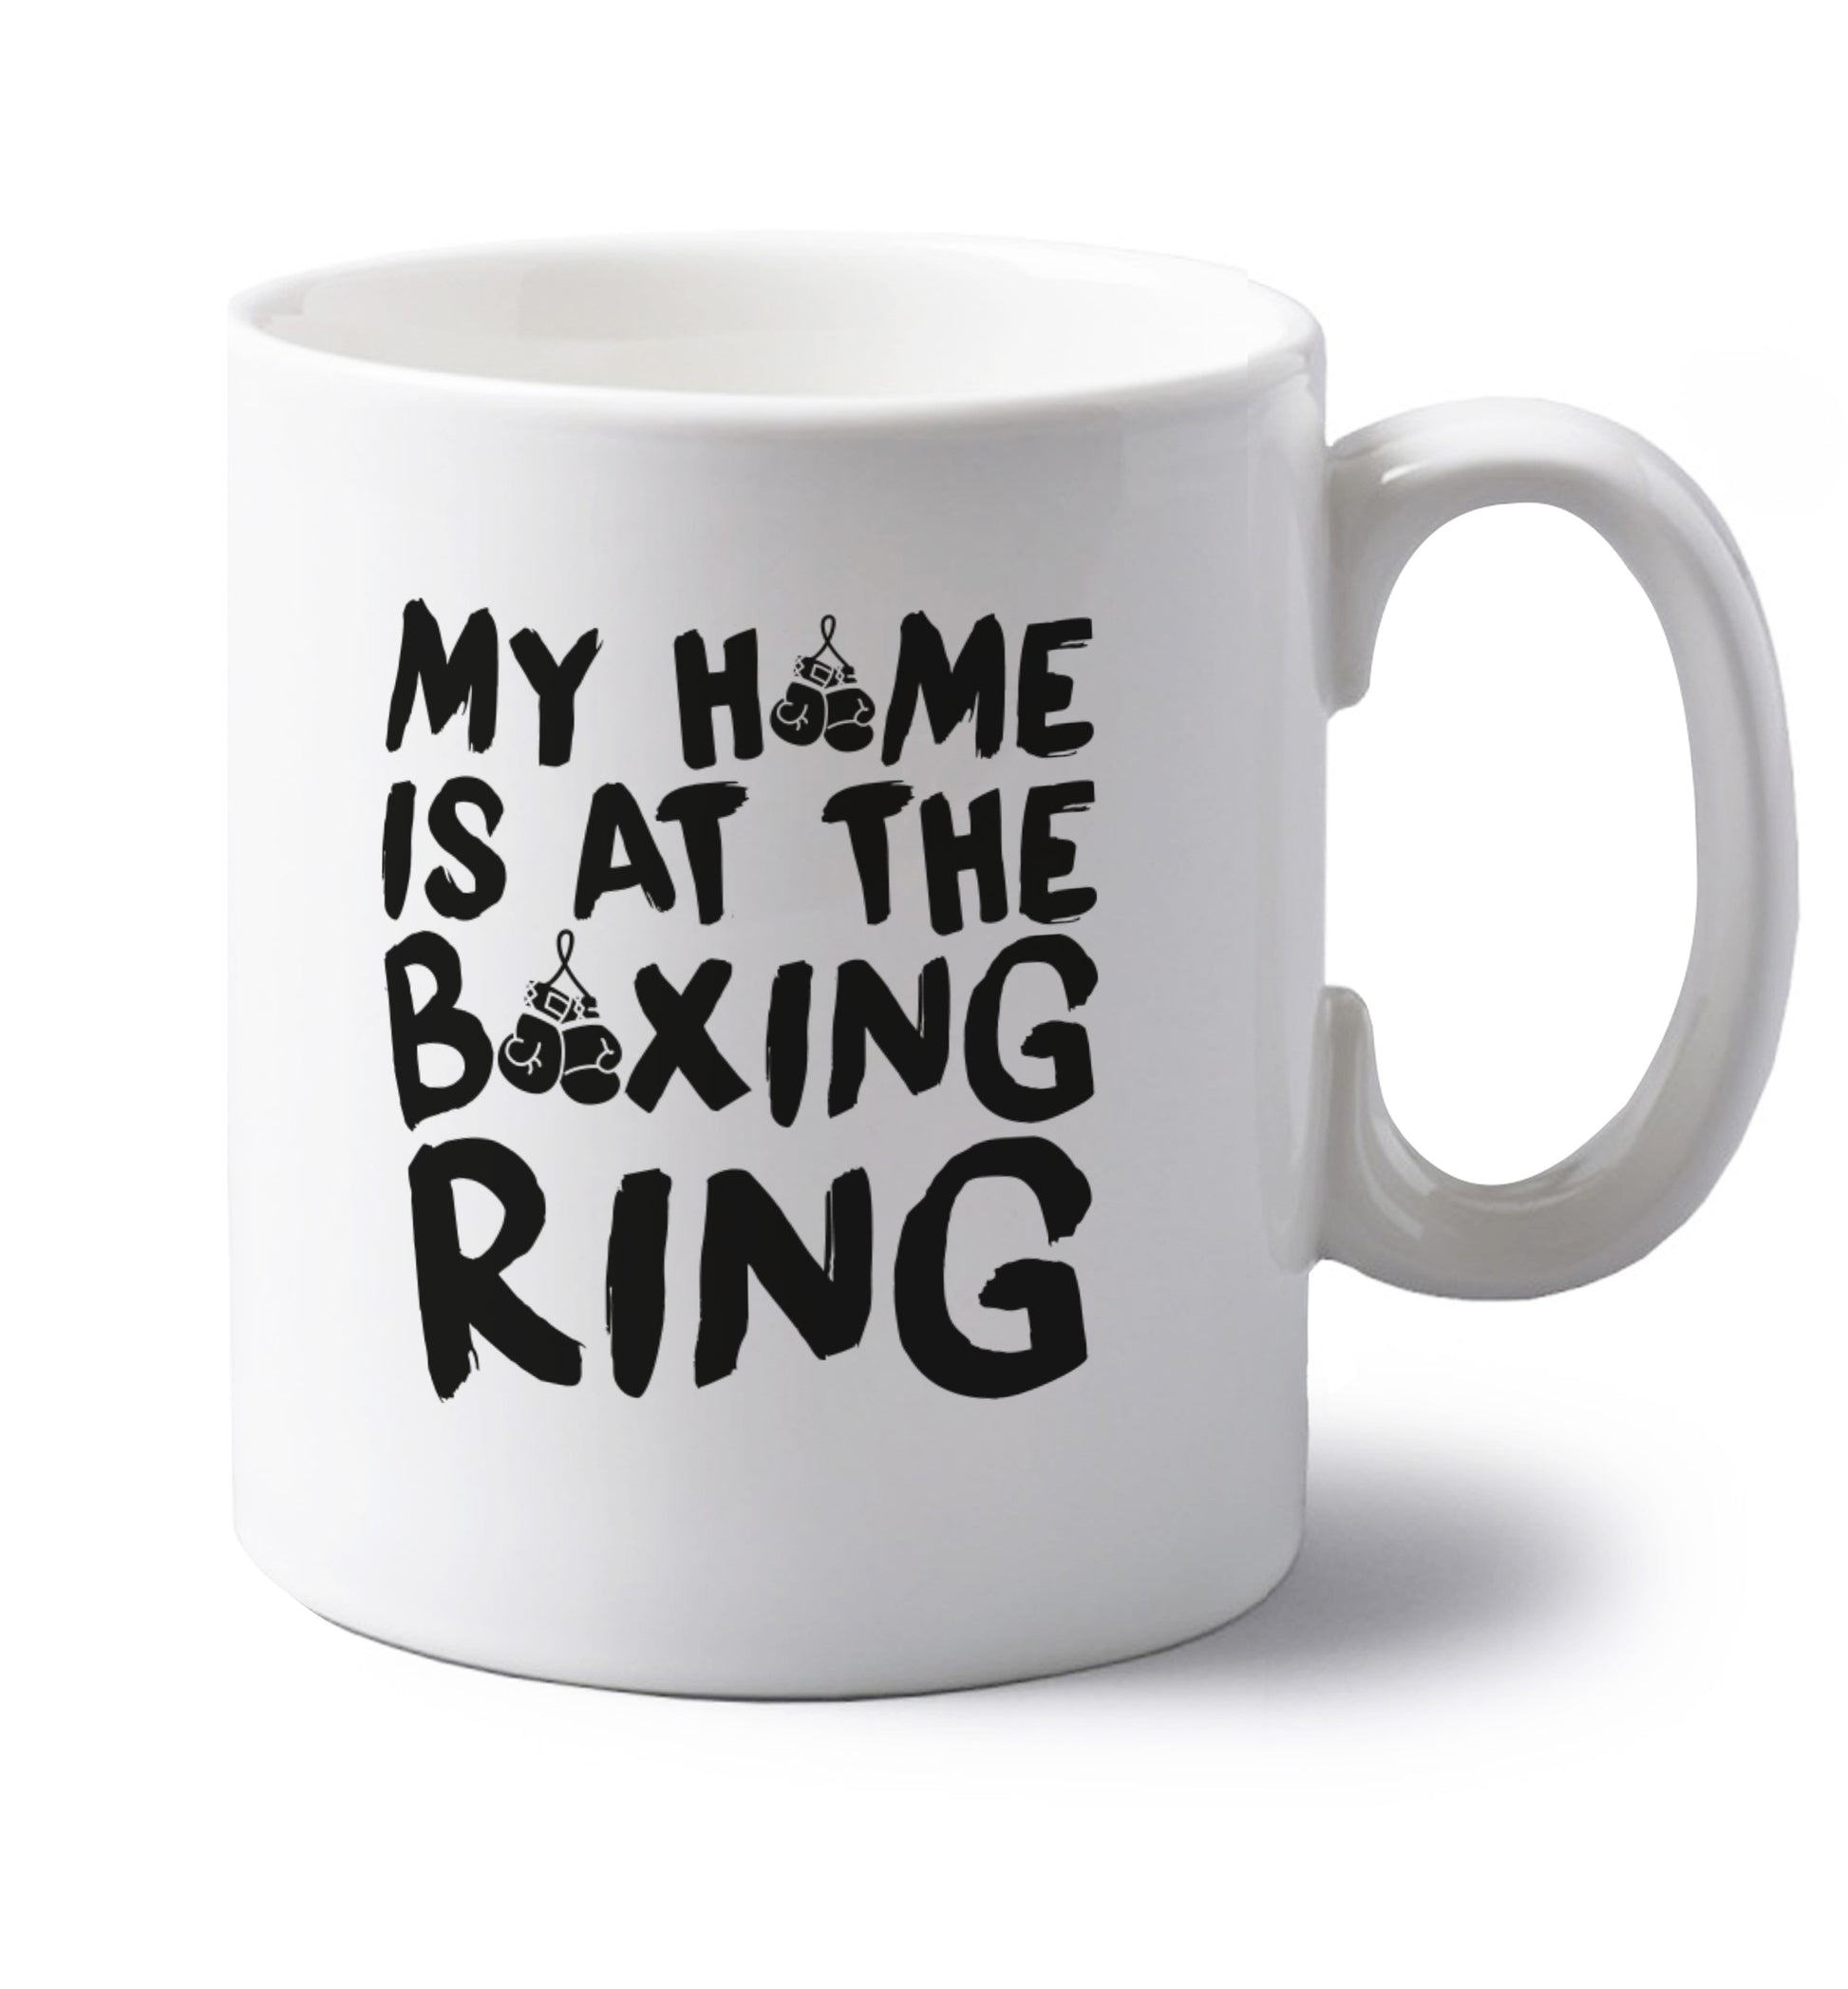 My home is at the boxing ring left handed white ceramic mug 